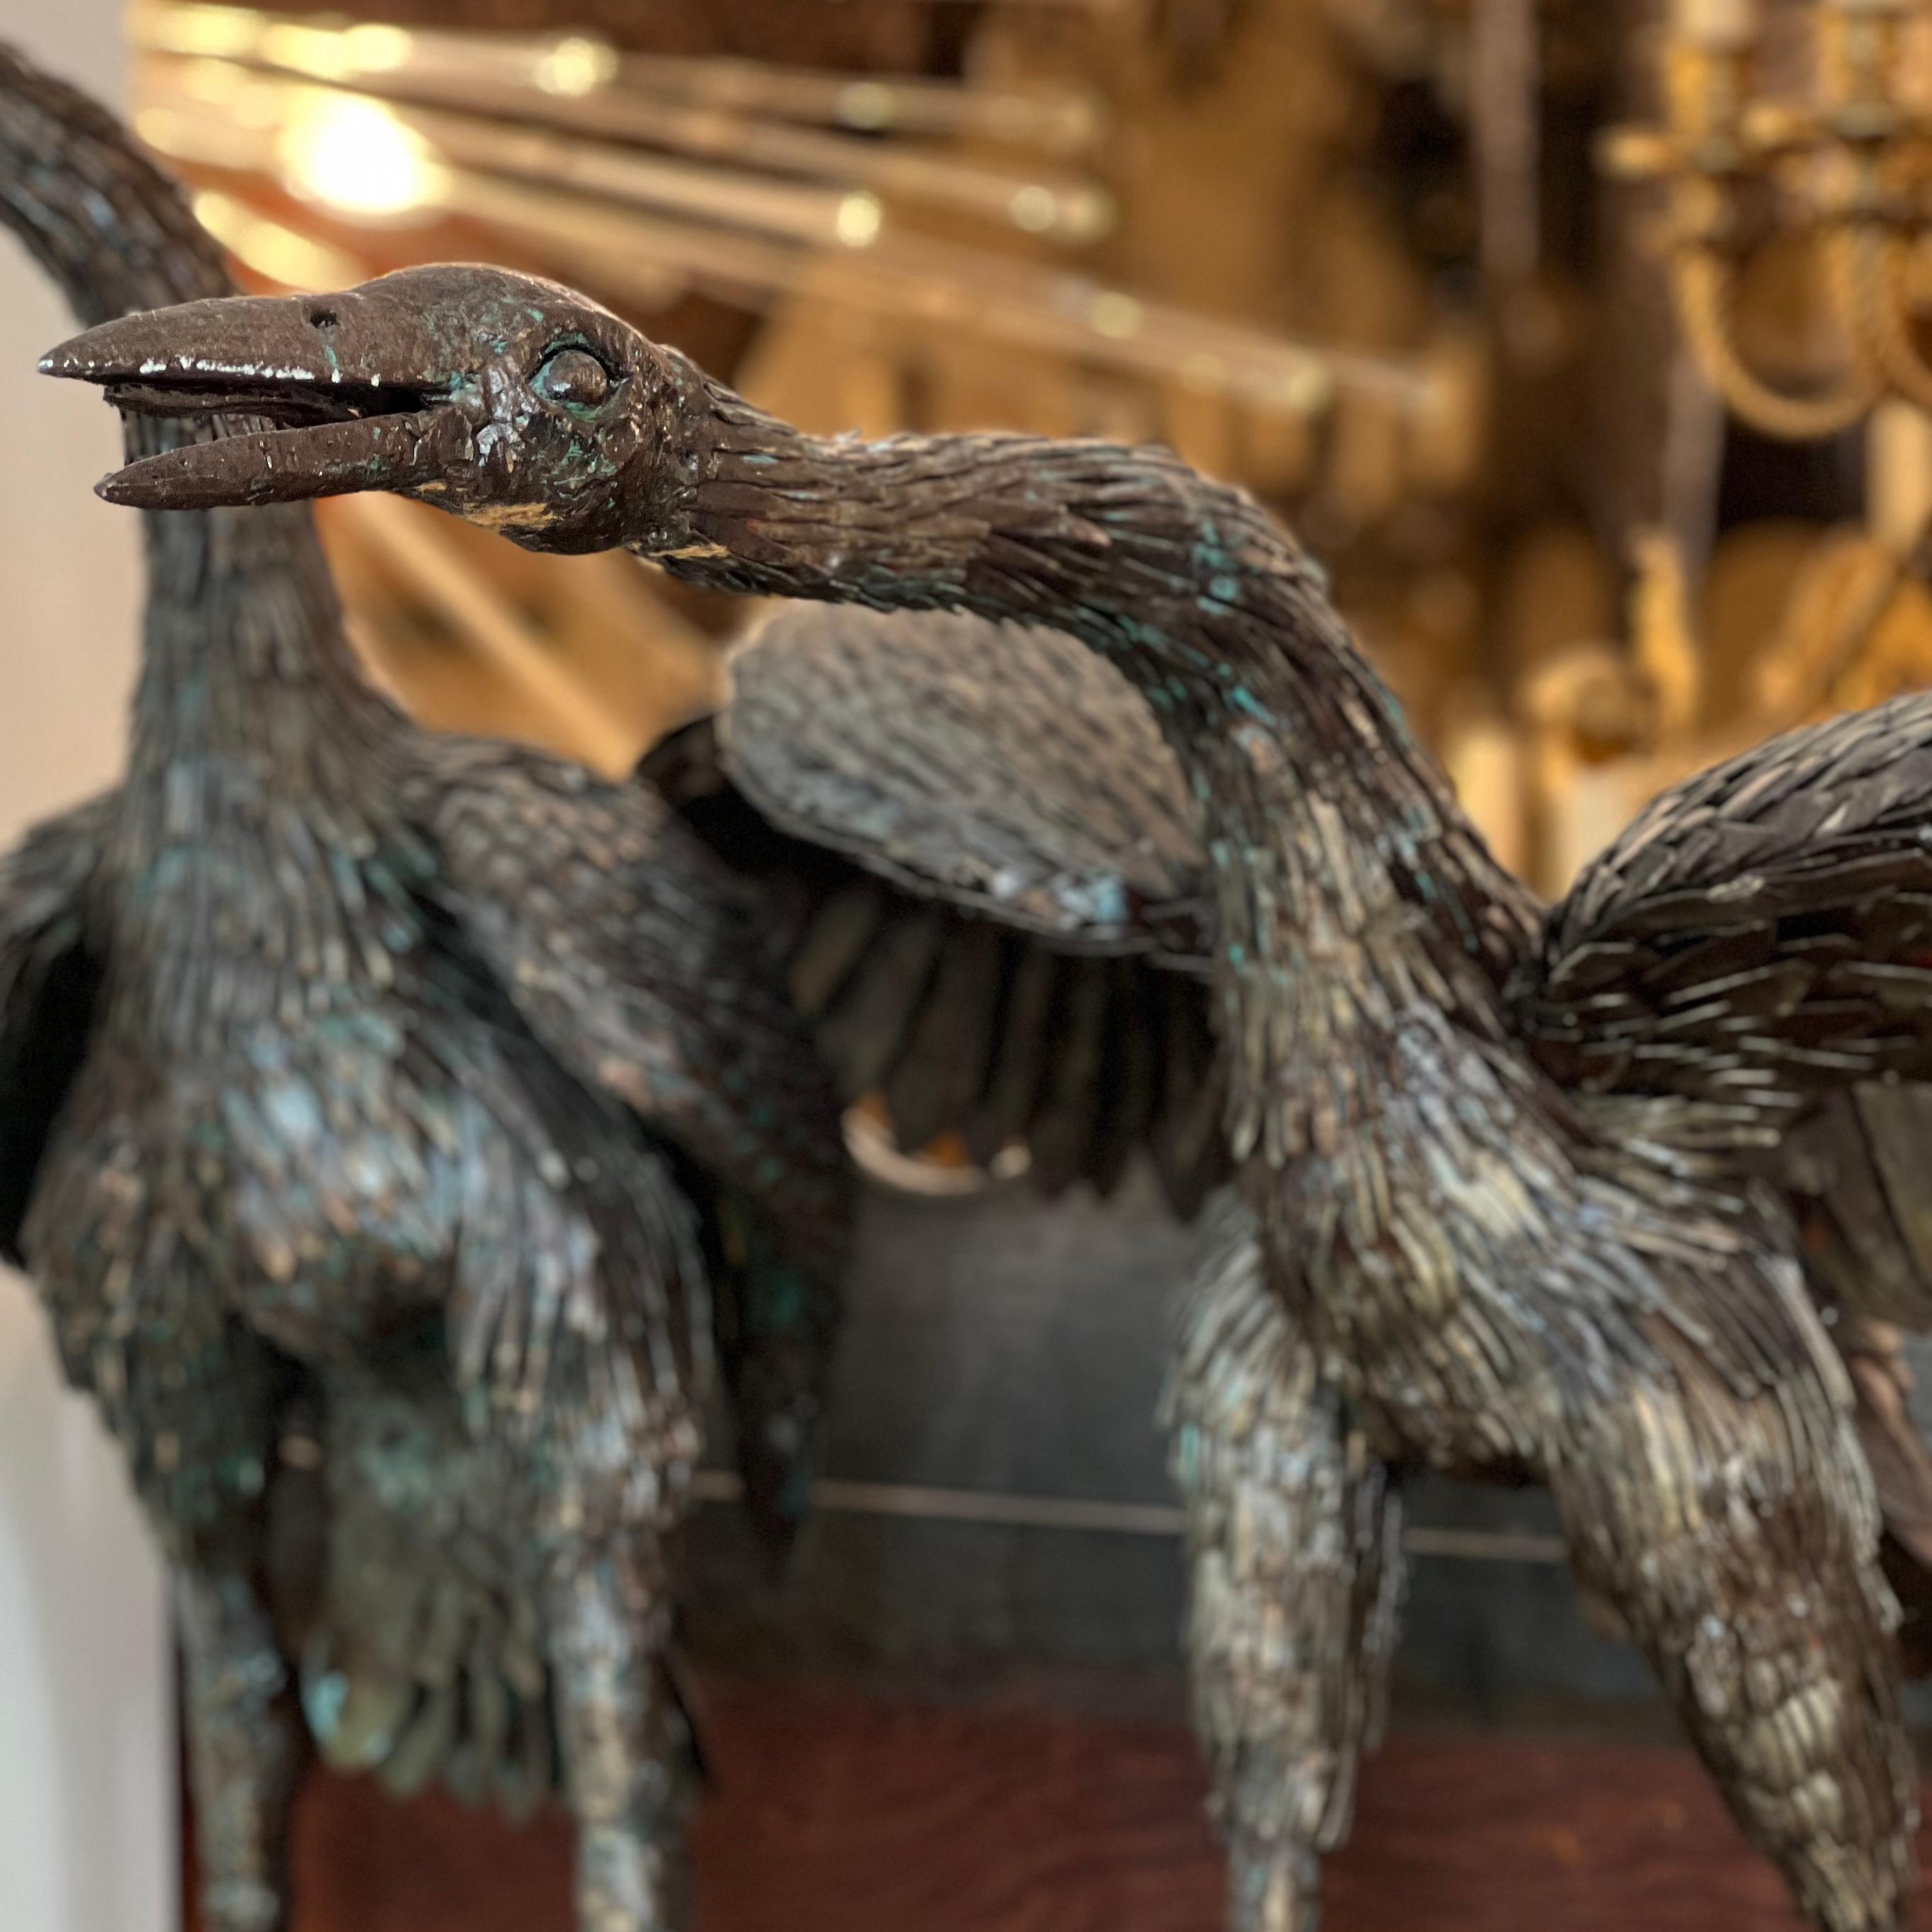 Pair of 1940s Italian hammered iron sculptures depicting two cranes. Original finish and patina.

Measurements:
Height: 34